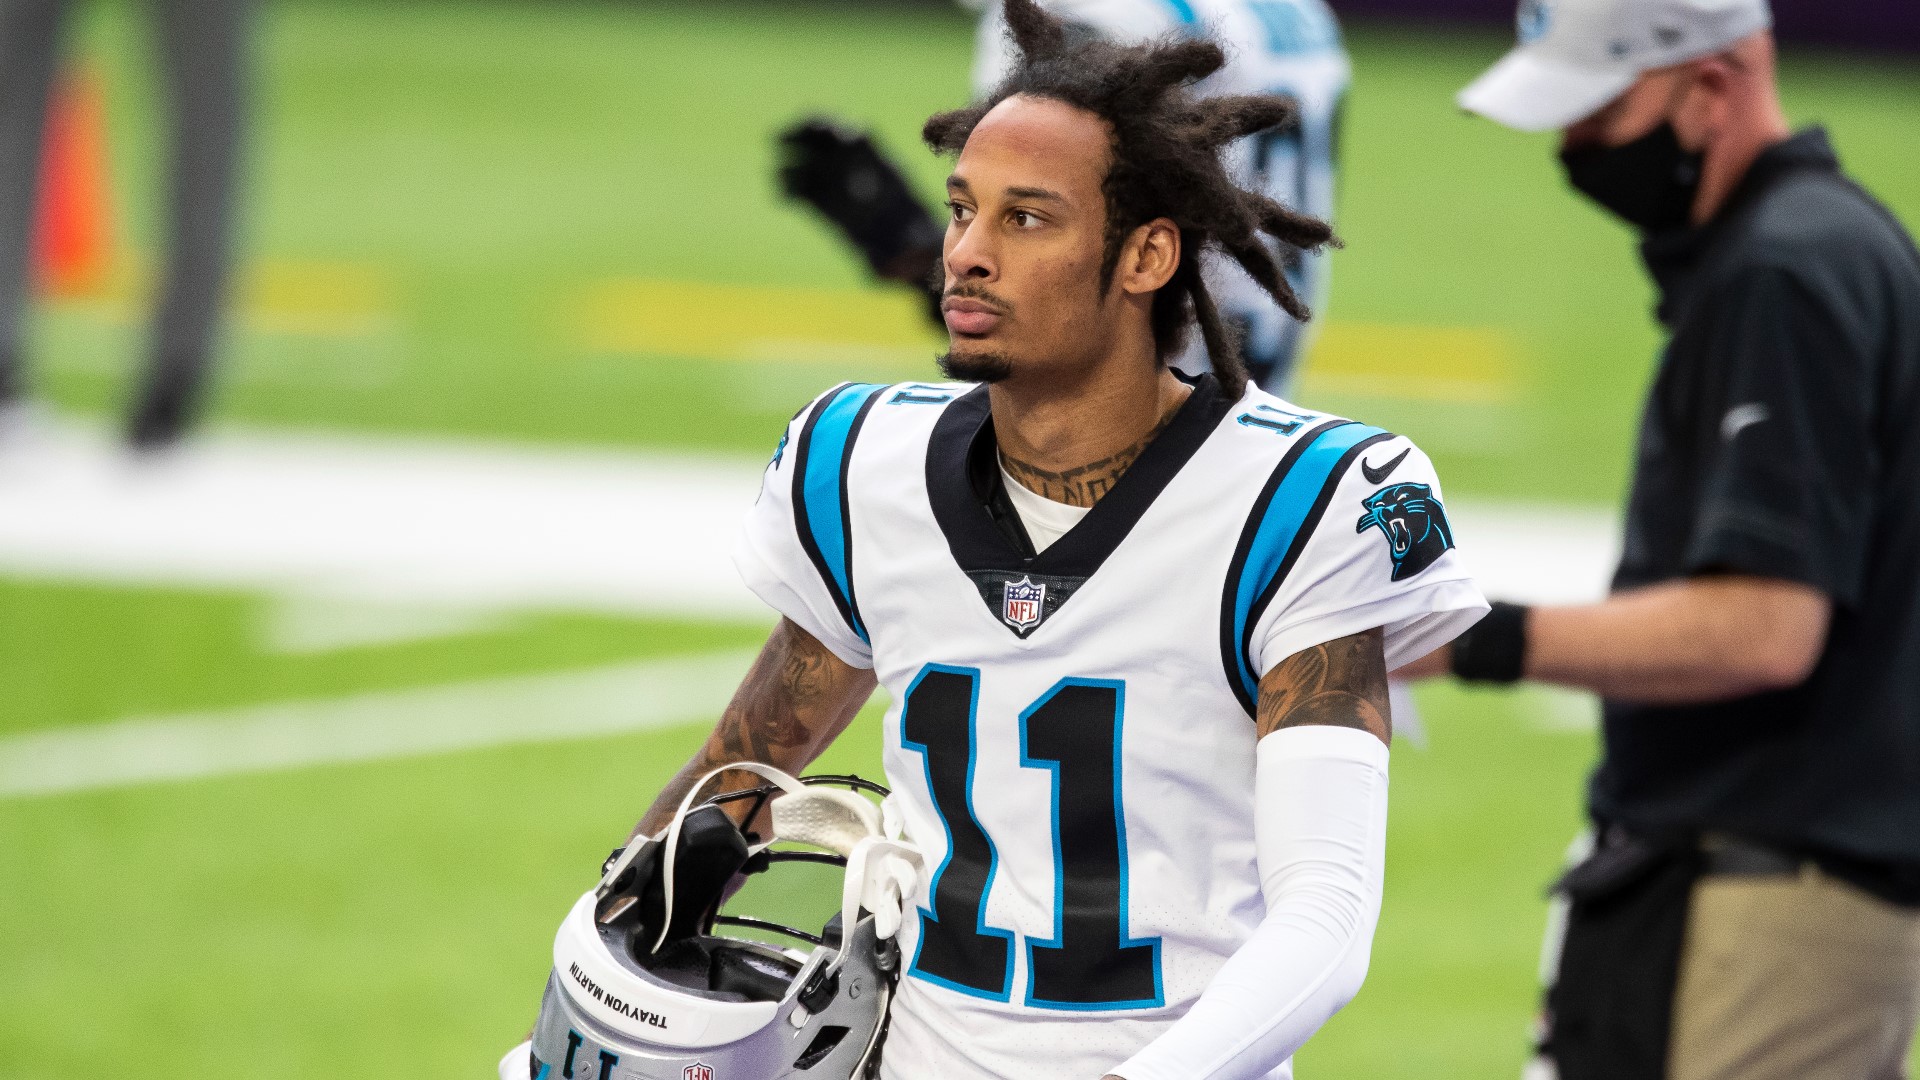 The Carolina Panthers and Robby Anderson have agreed to a two-year contract extension that will keep the veteran wide receiver in Charlotte through the 2023 season.